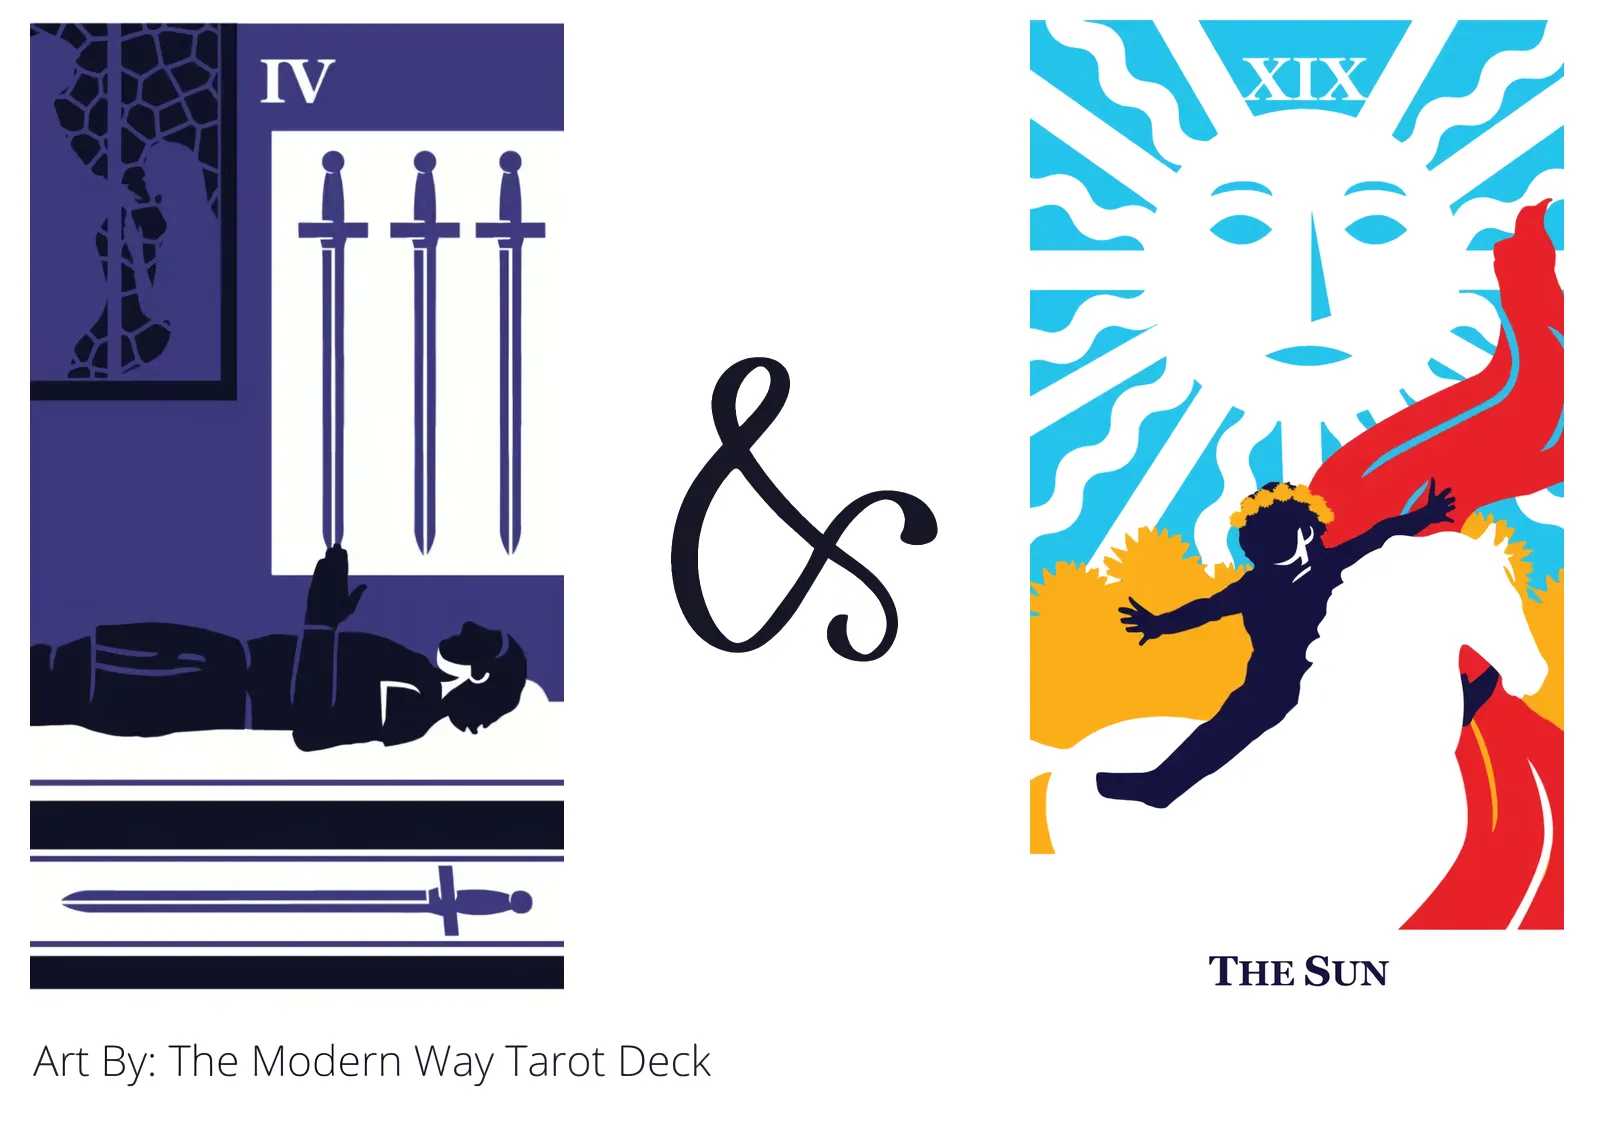 four of swords and the sun tarot cards together